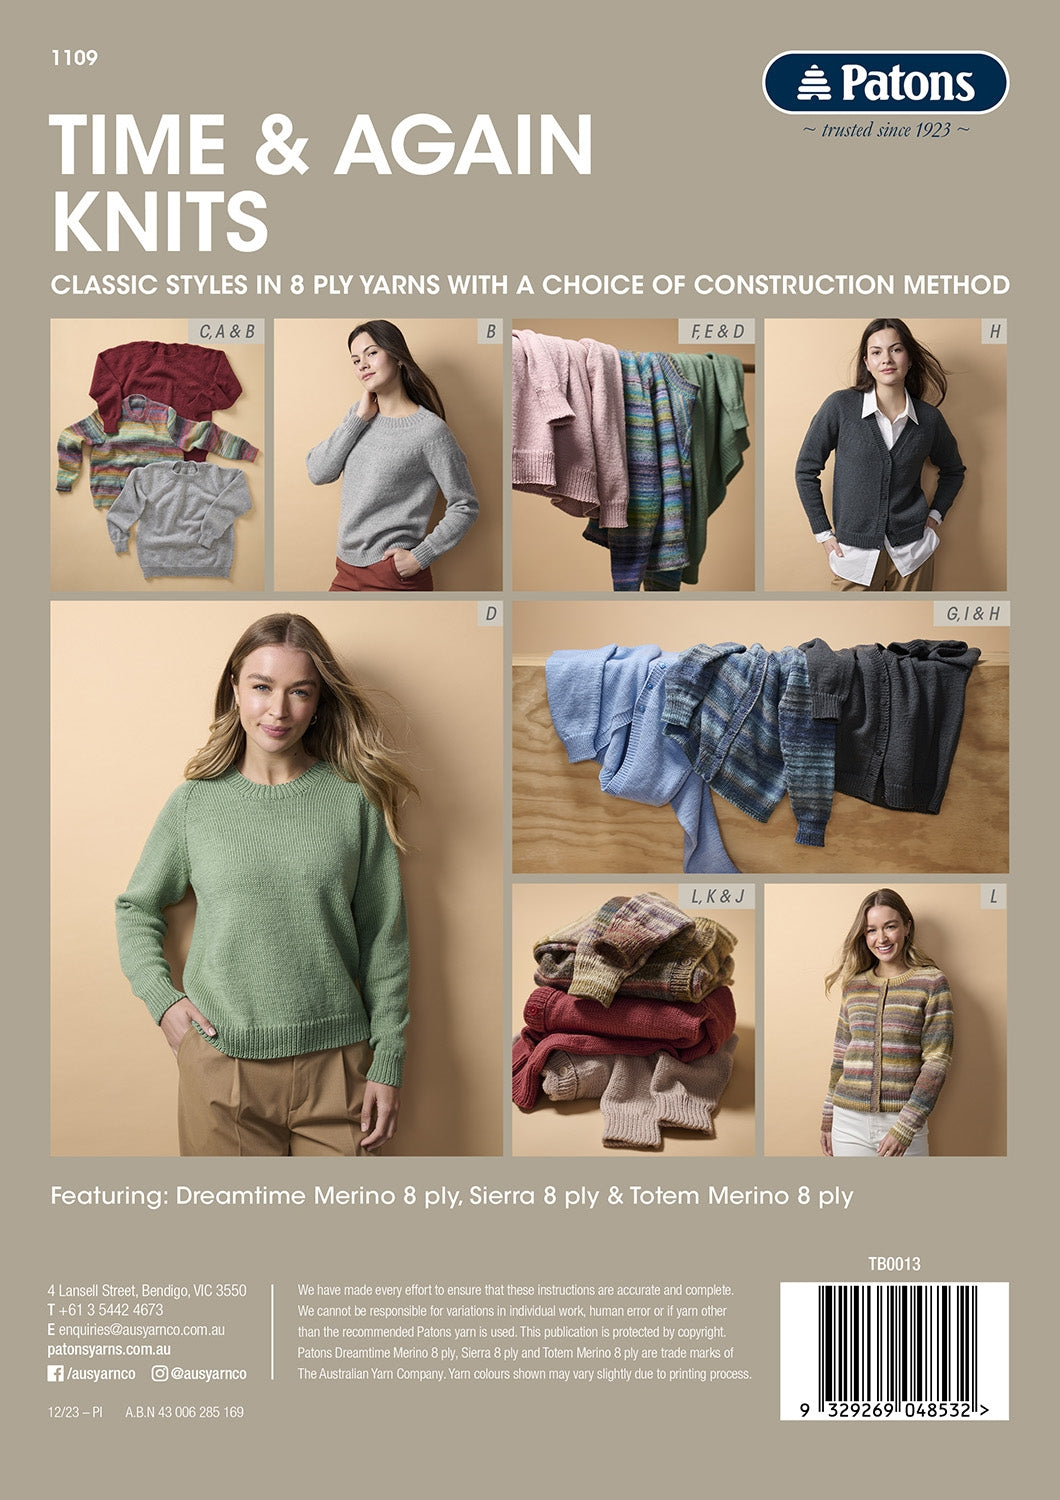 Book 1109 - Time & Again Knits